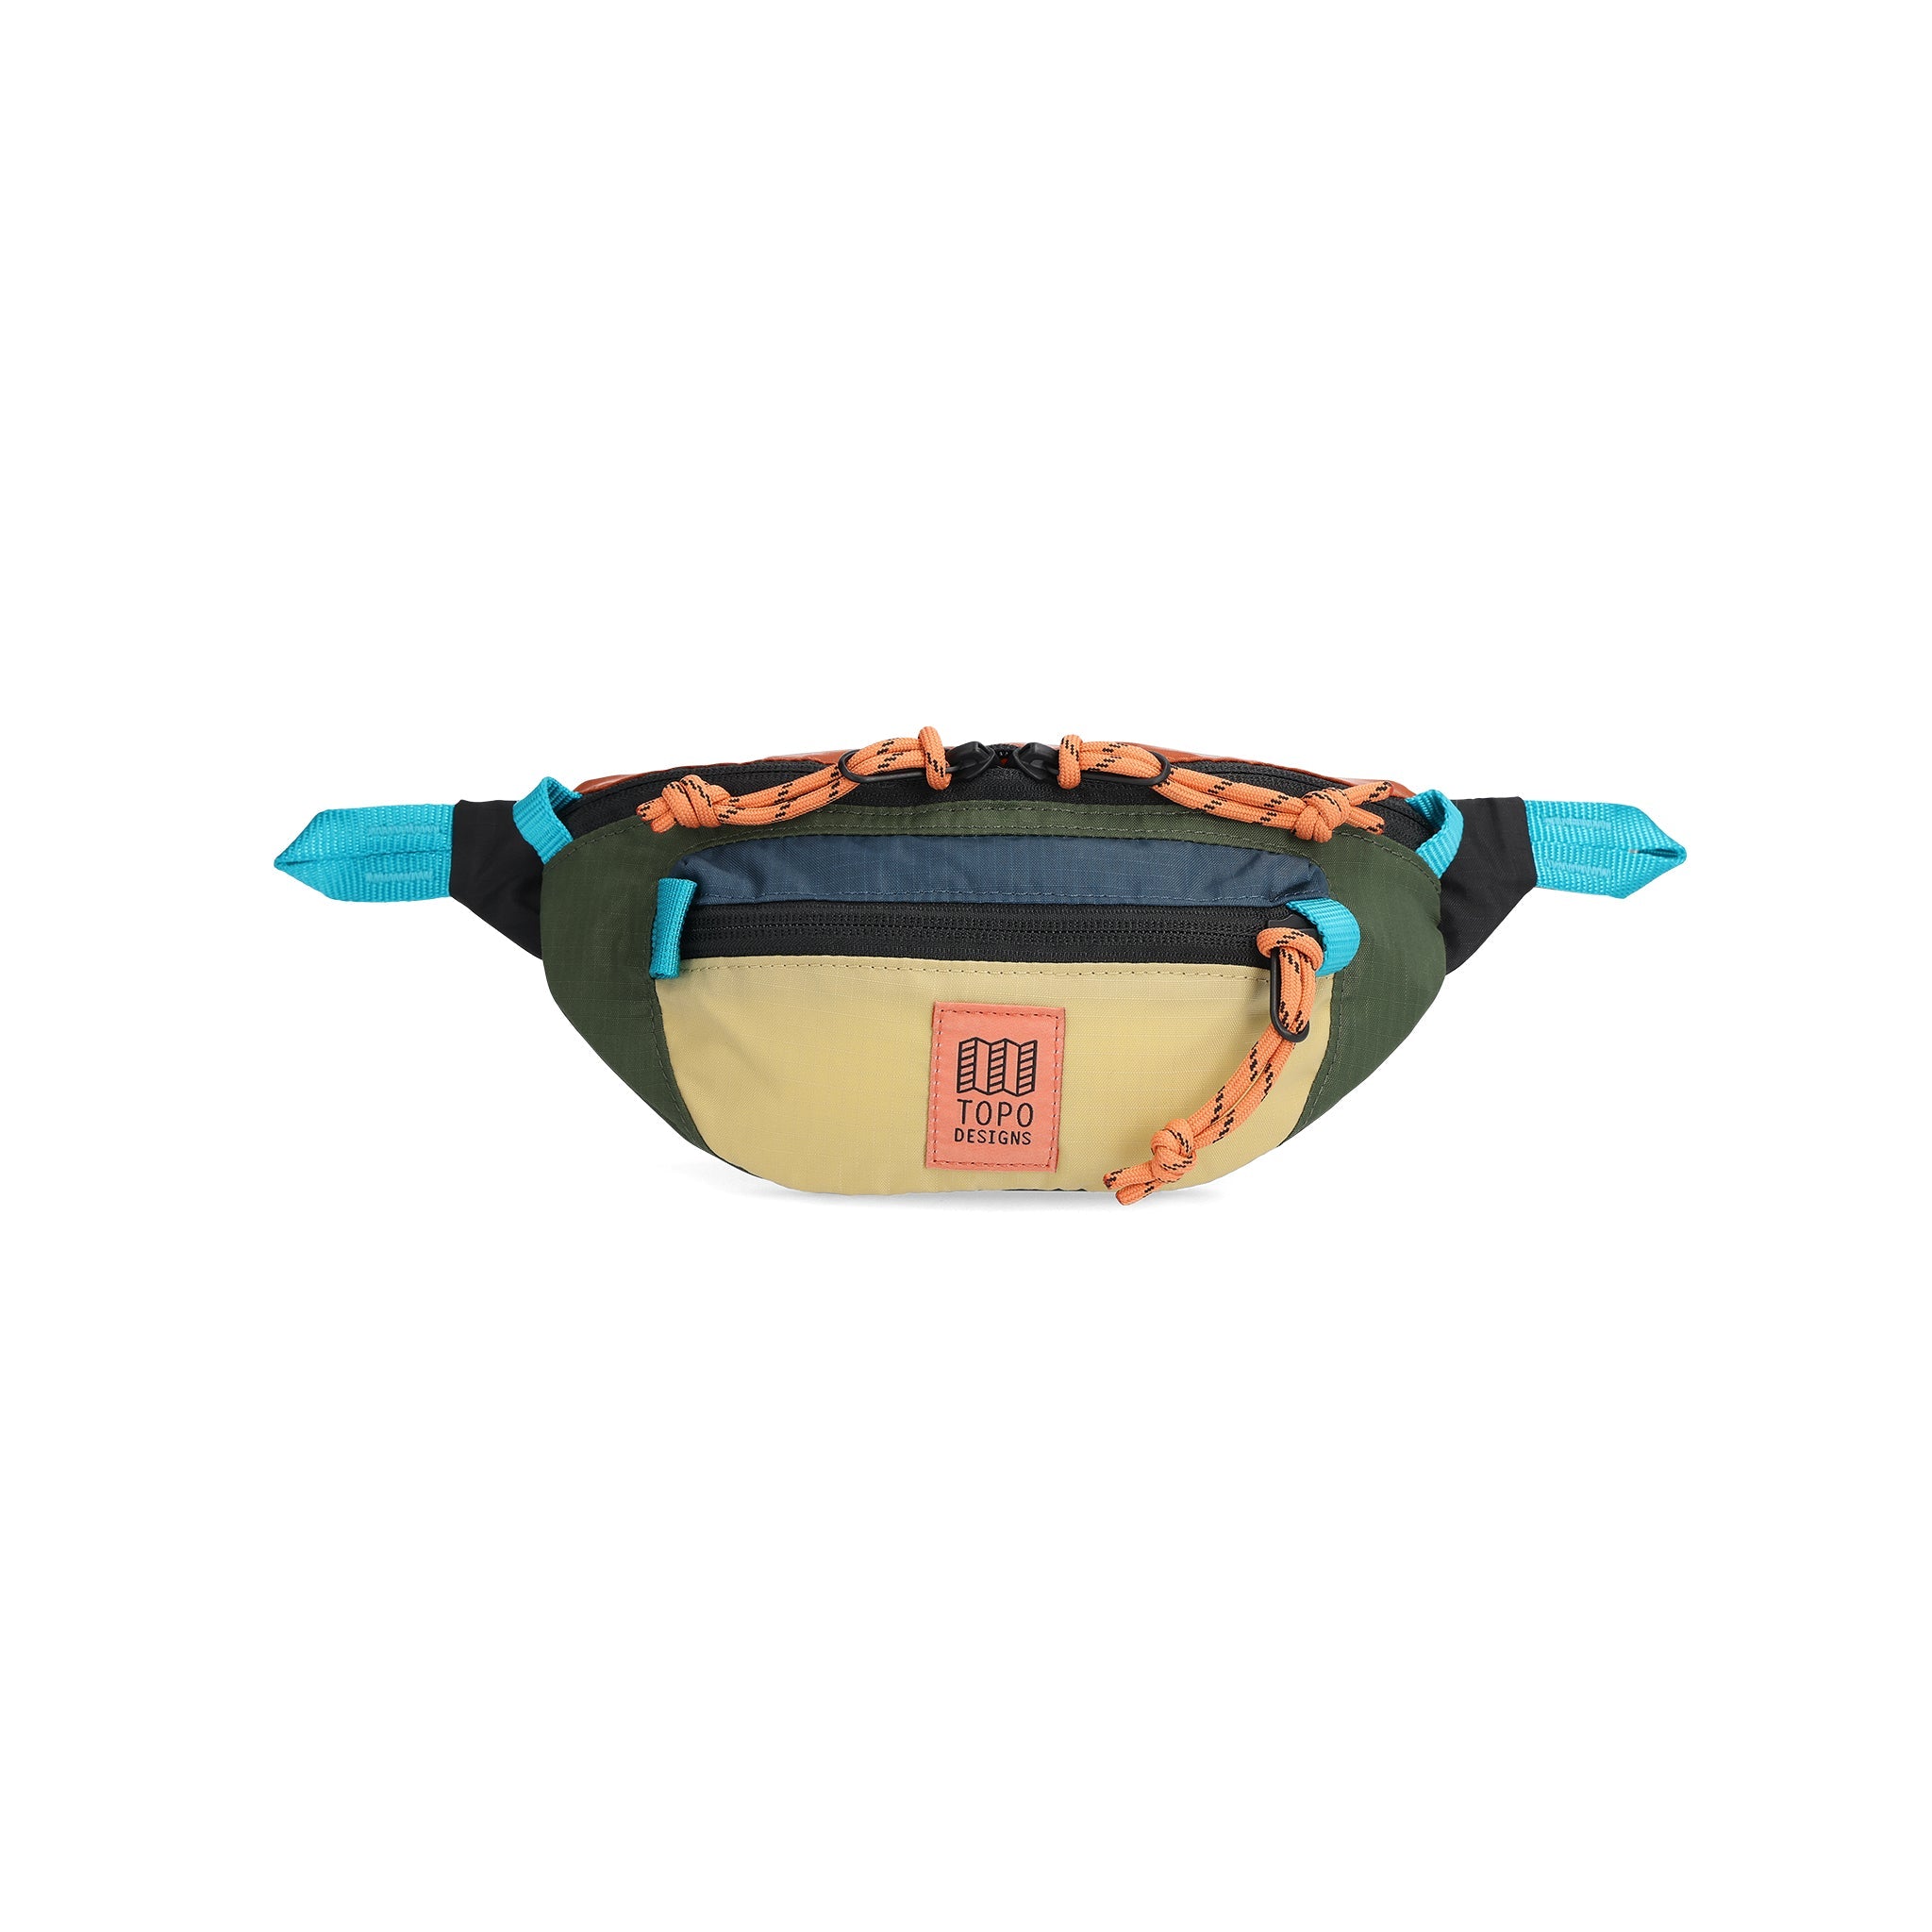 Front View of Topo Designs Mountain Waist Pack in "Olive / Hemp"